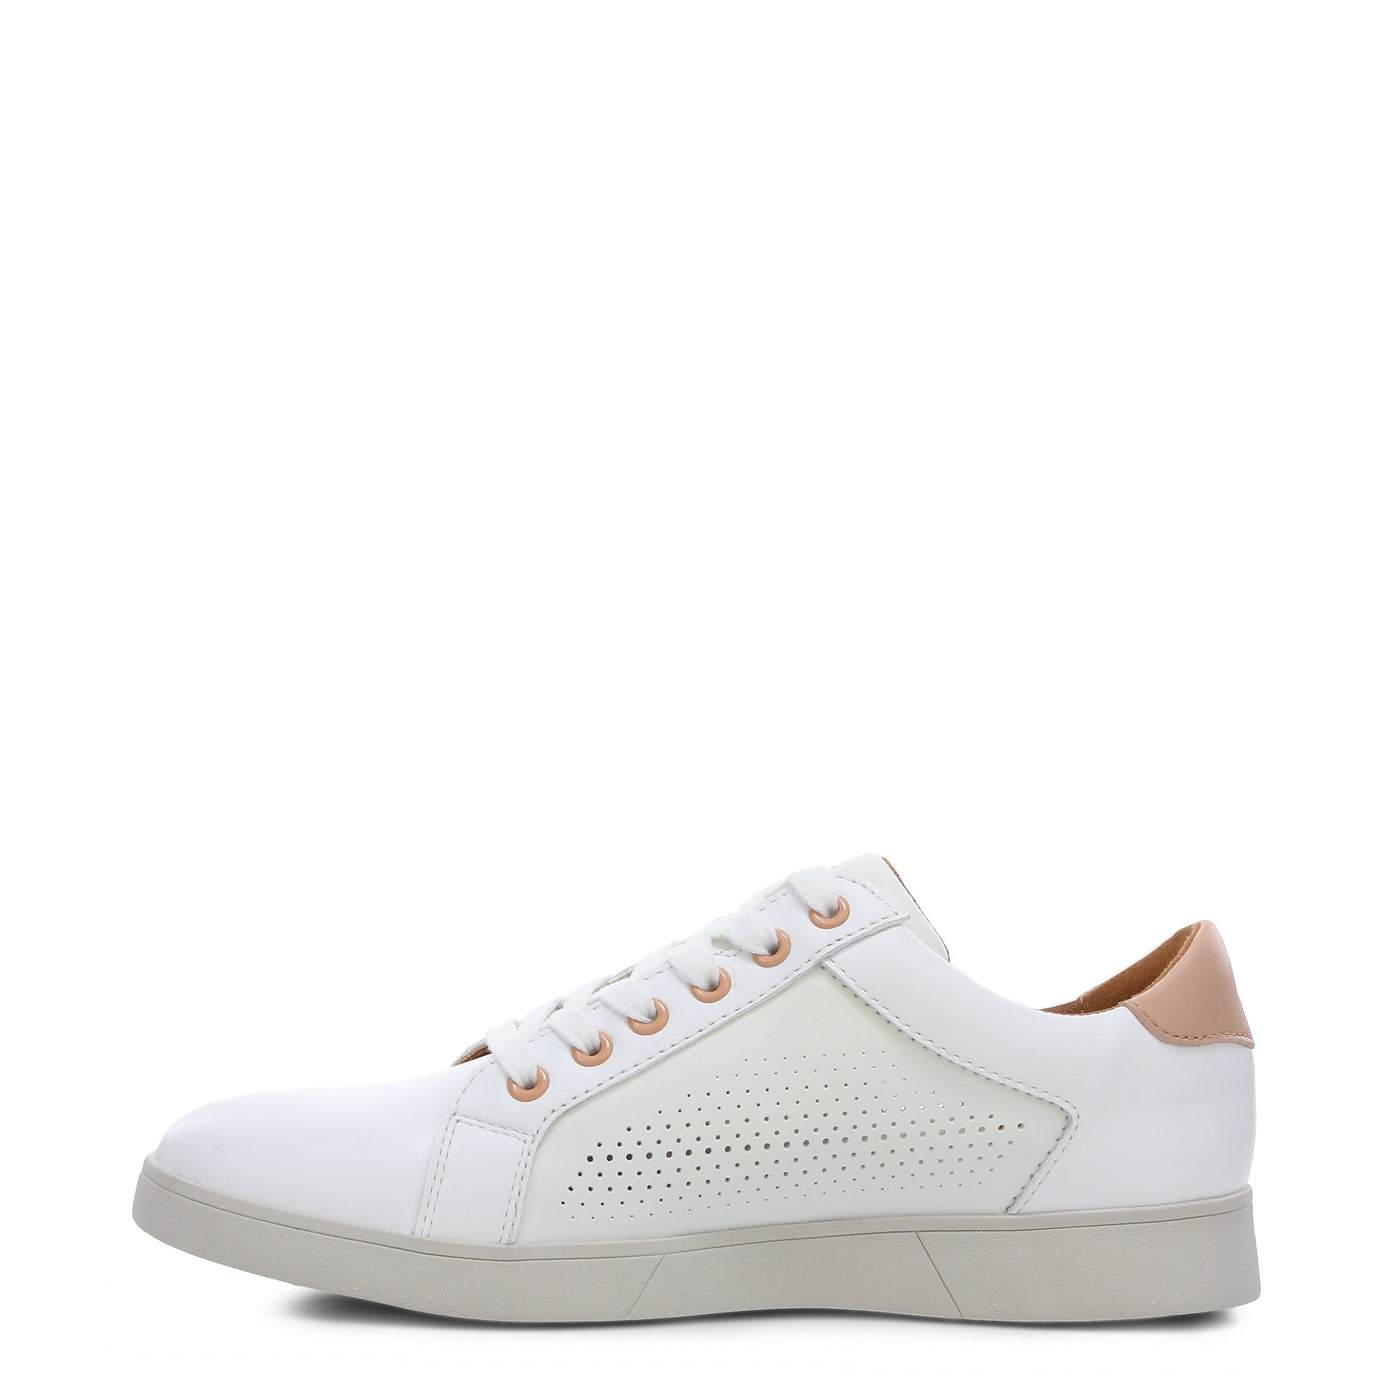 HUSH PUPPIES MIMOSA PERF WHITE COPPER - Women sneakers - Collective Shoes 